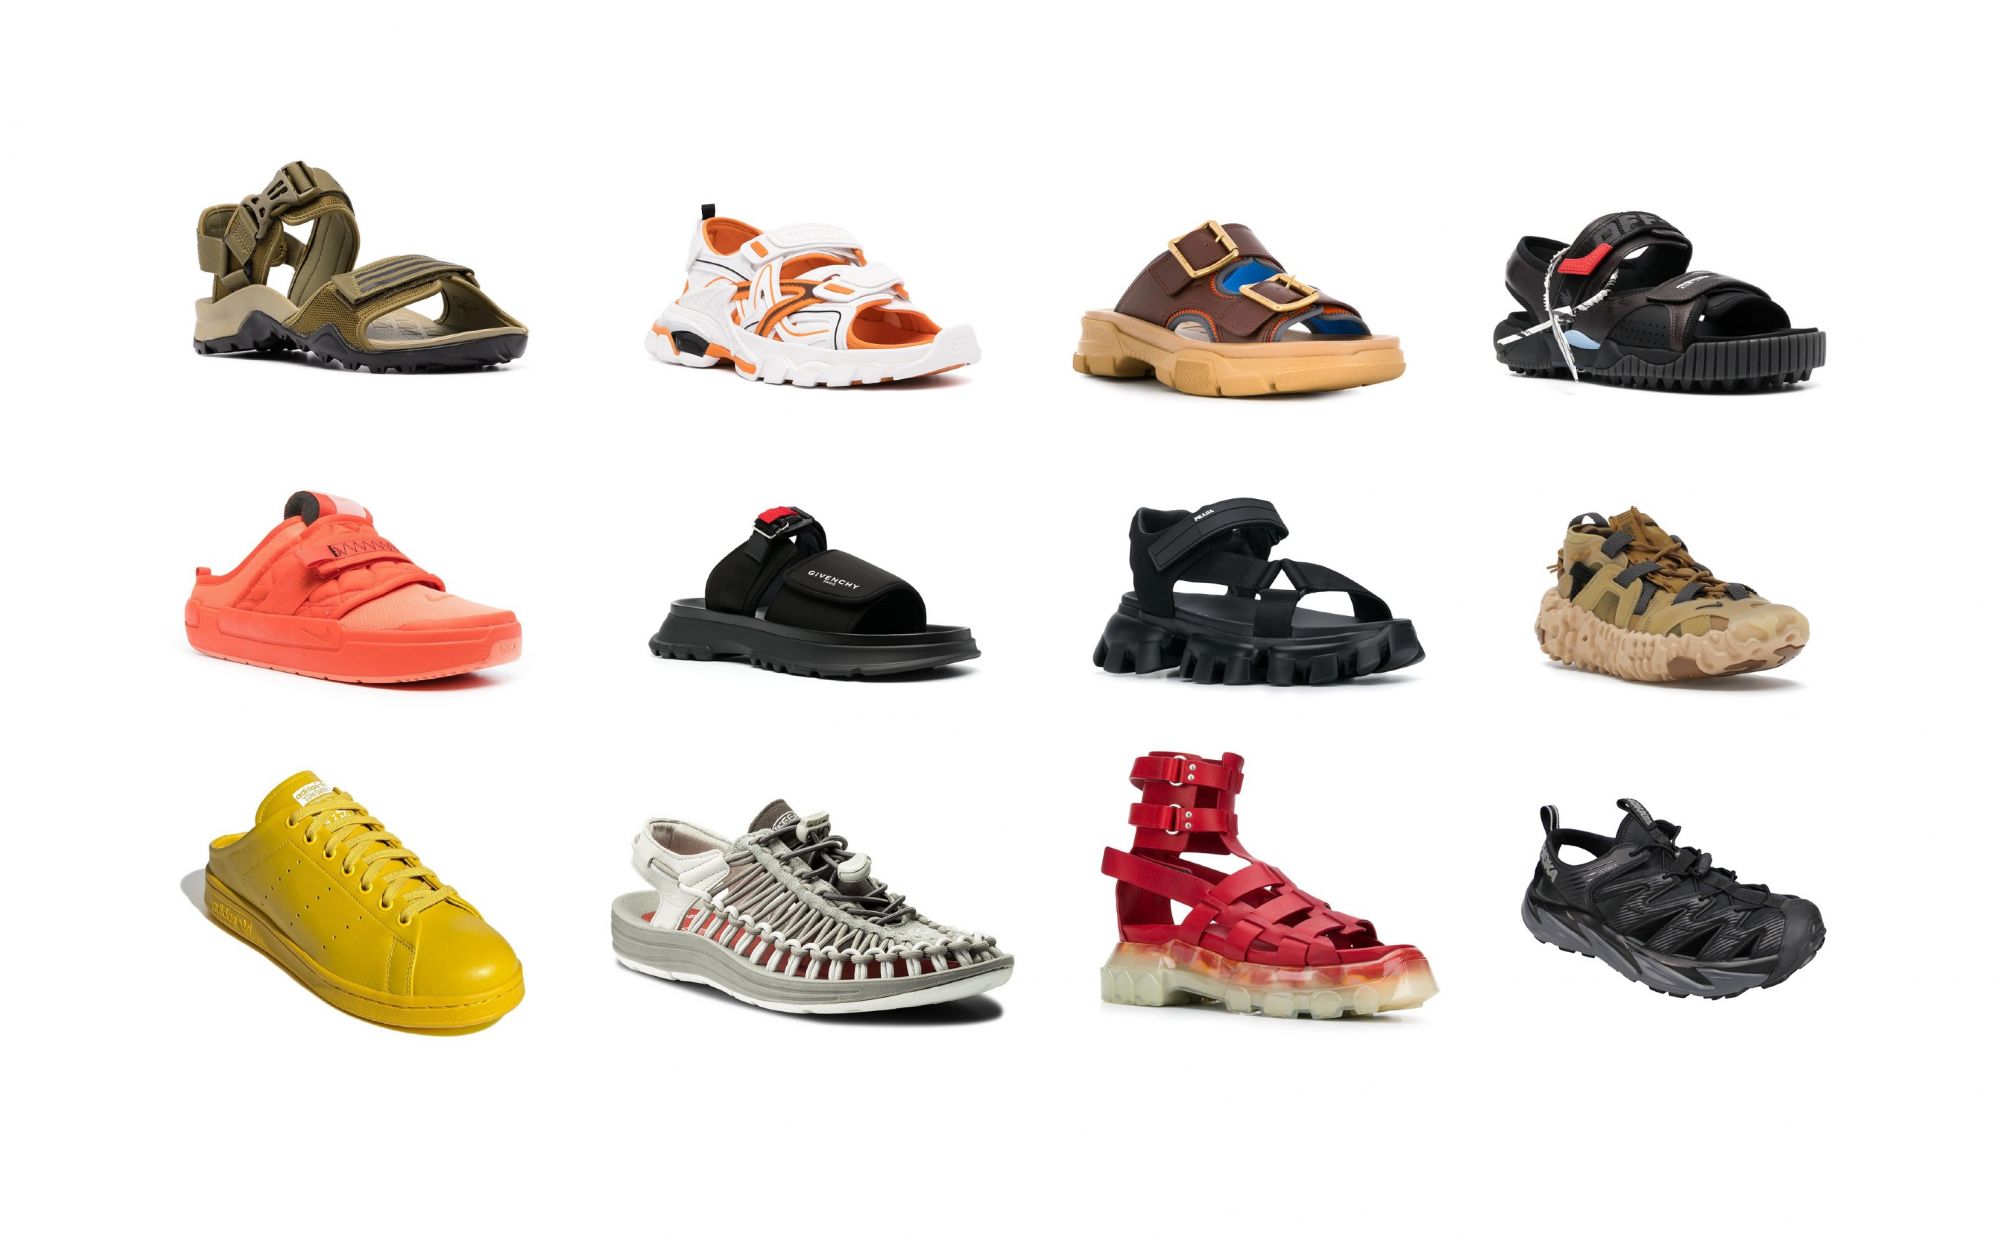 The summer of hybrid sneakers